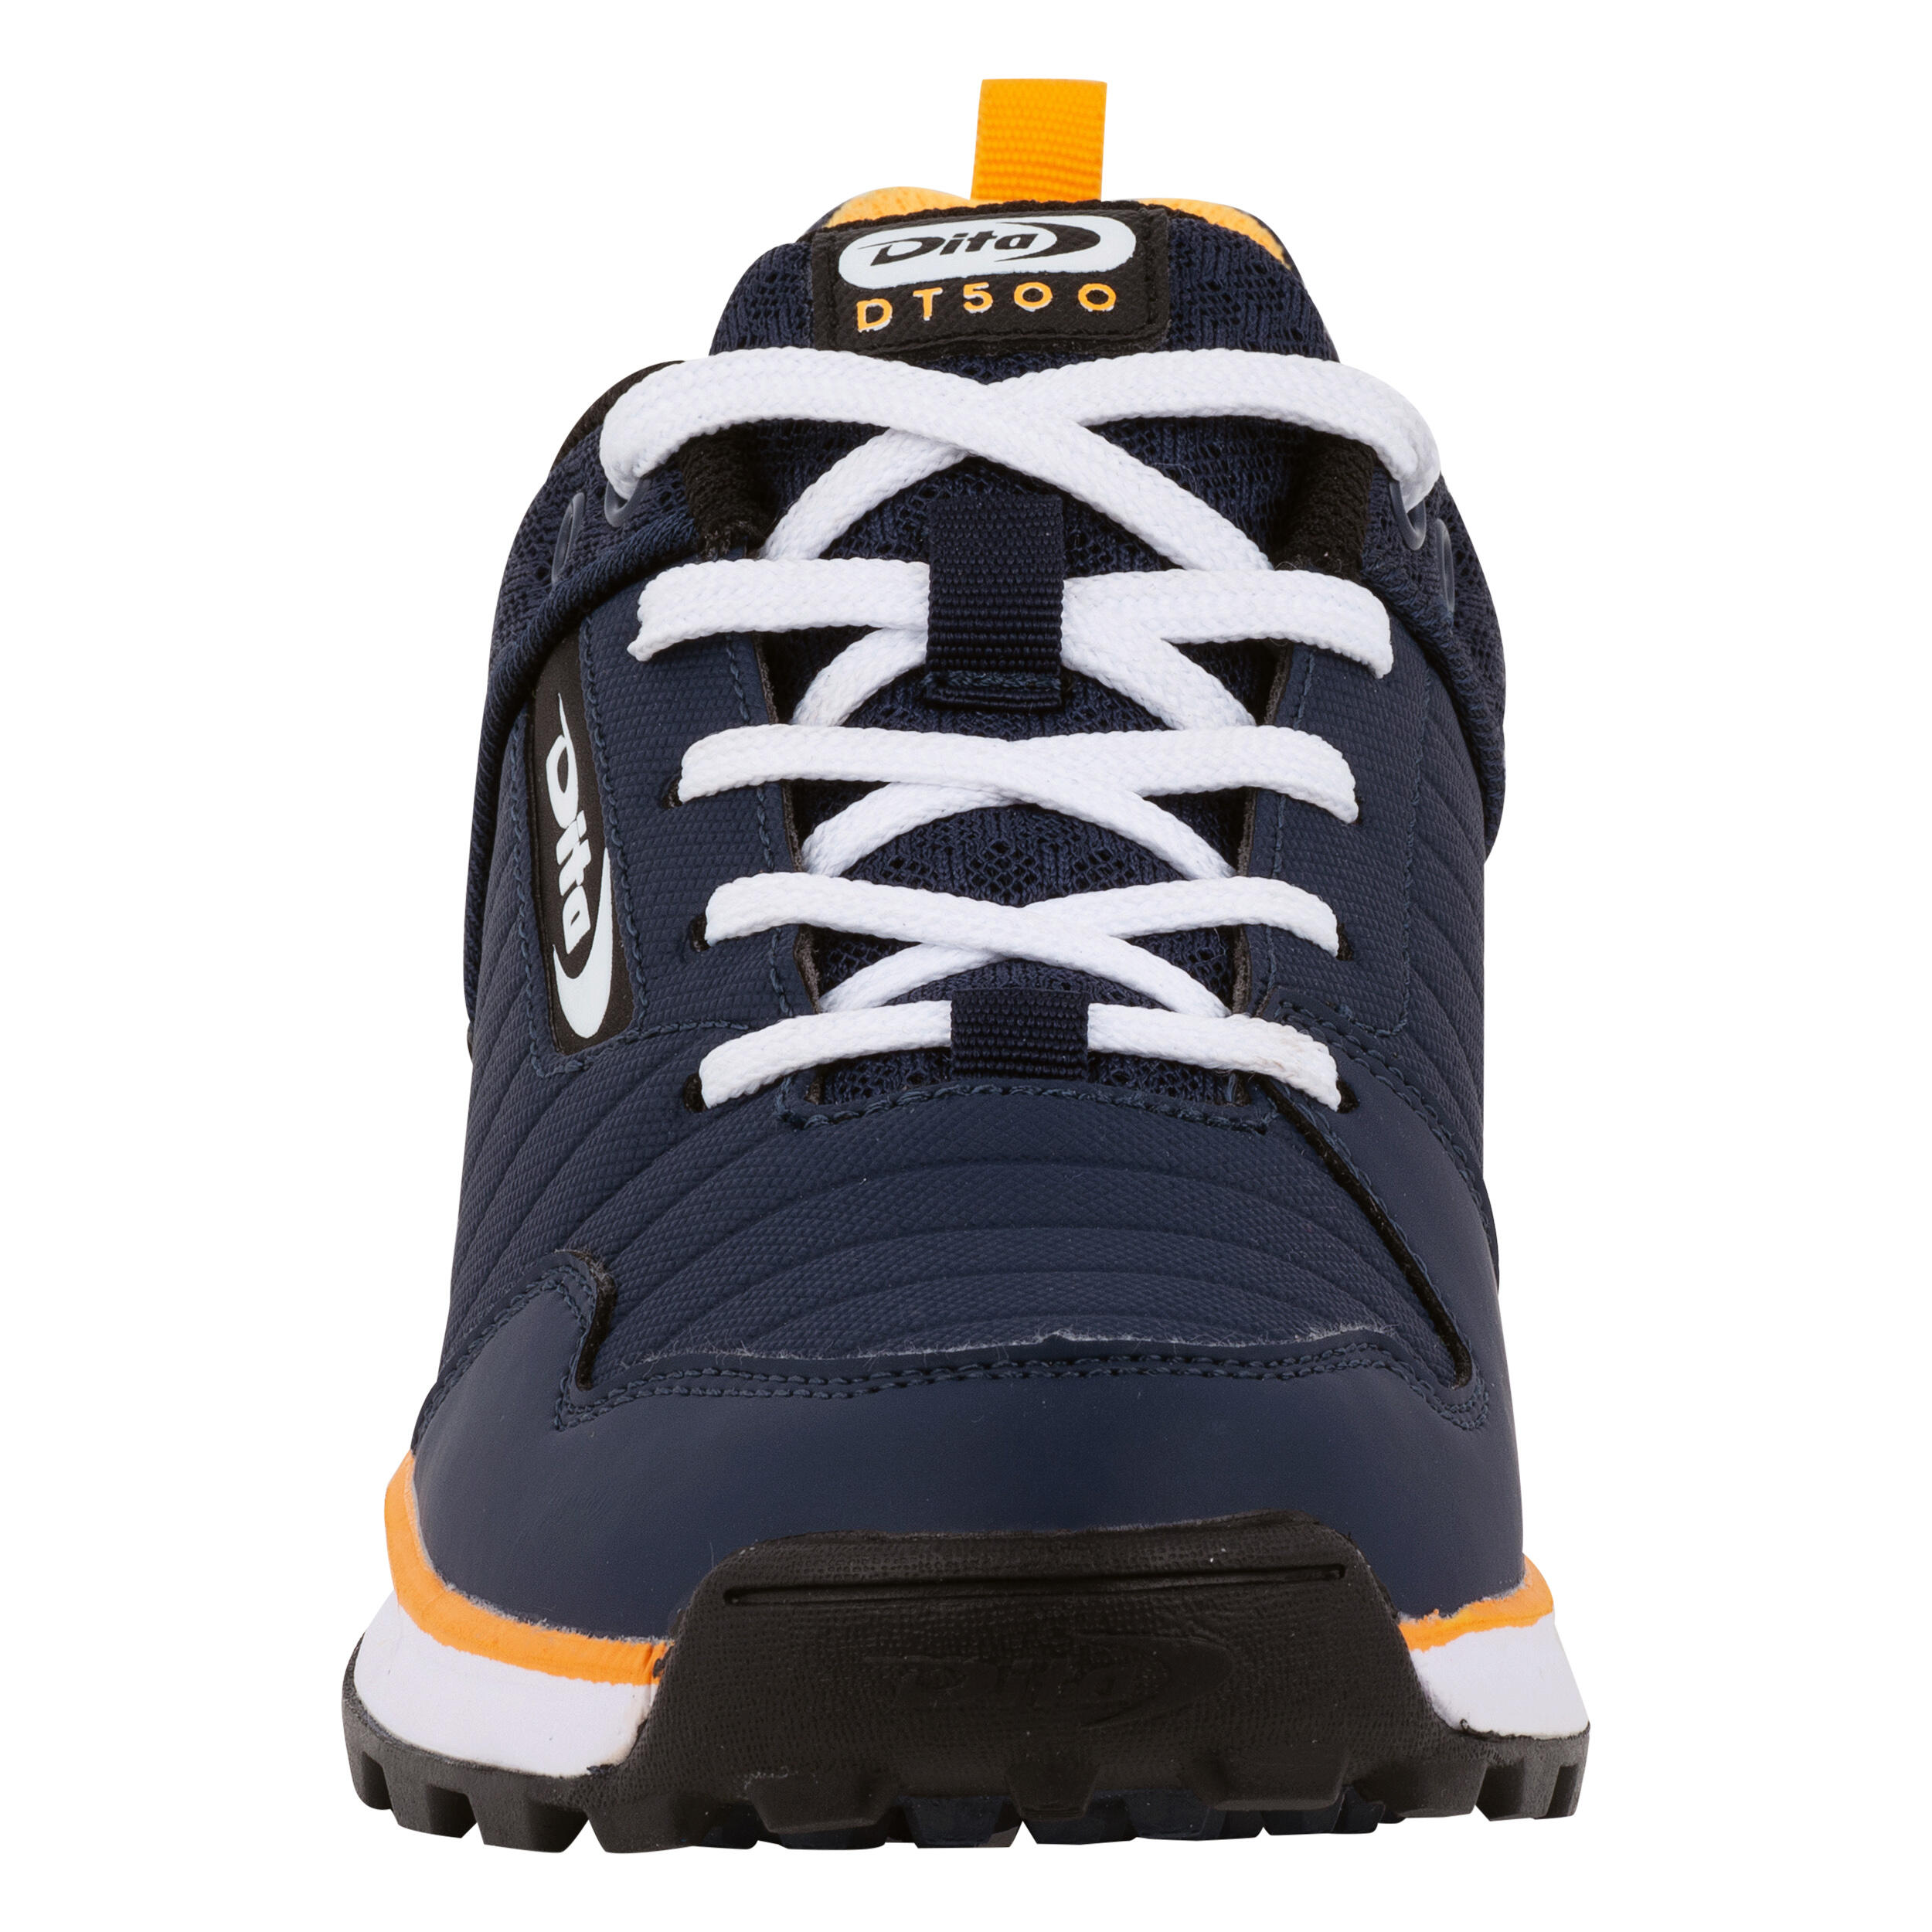 Teens' Moderate-Intensity Hockey Shoes DT500 - Blue/Yellow 3/7